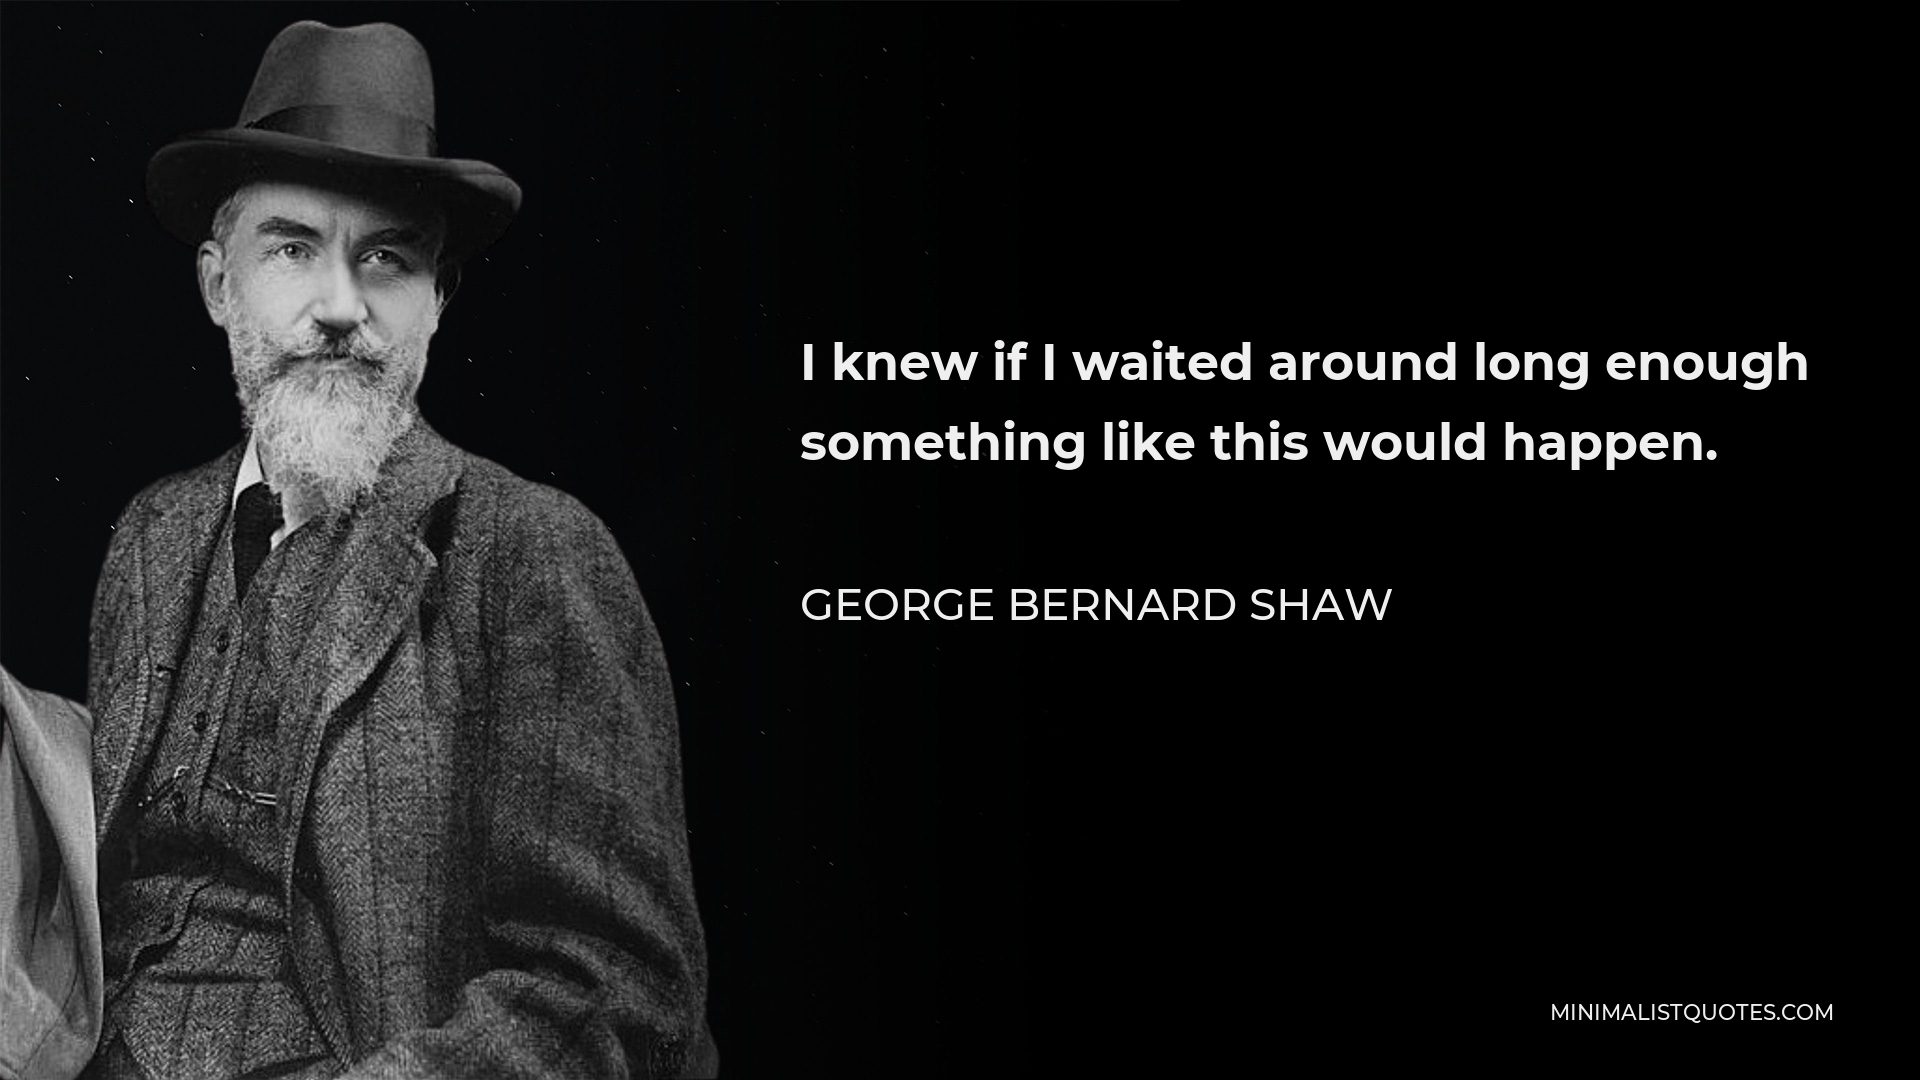 George Bernard Shaw Quote - I knew if I waited around long enough something like this would happen.